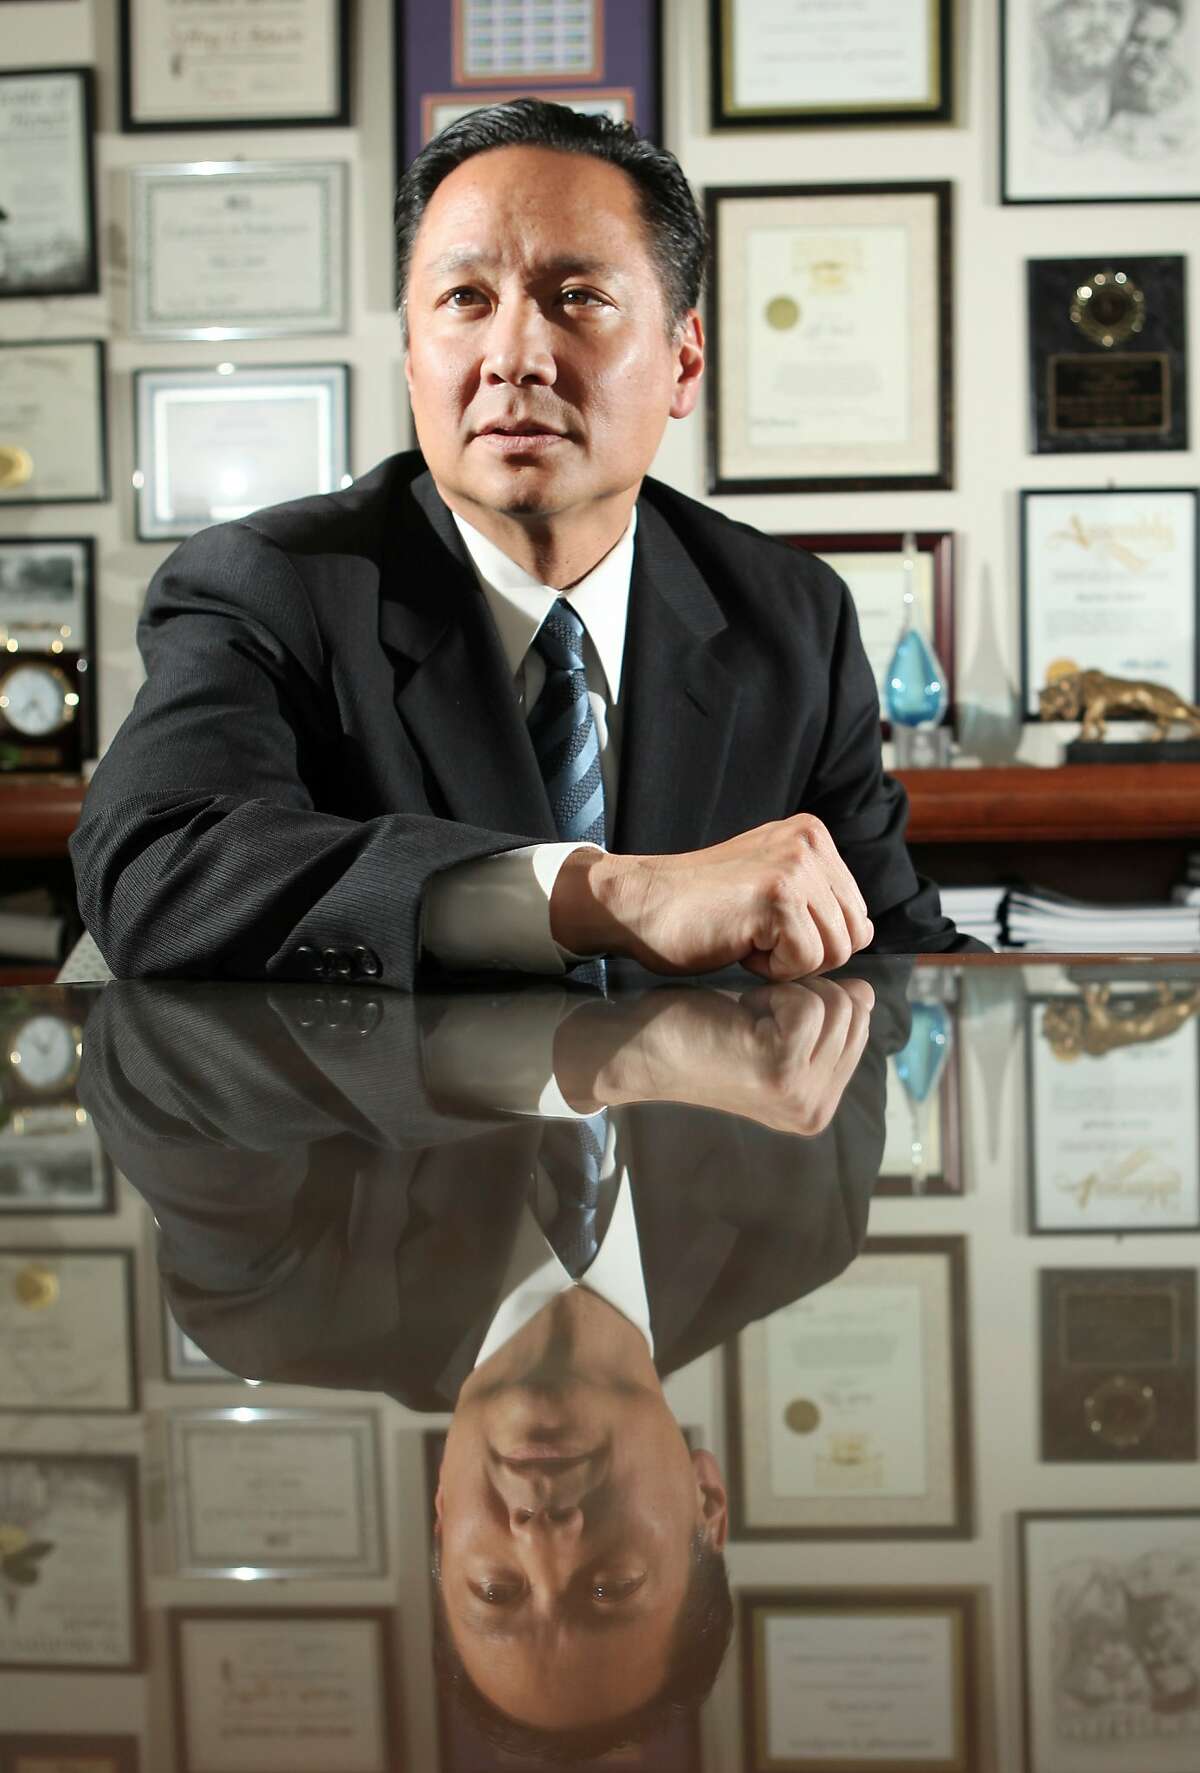 In this photo from Tuesday, June 9, 2009, San Francisco Public Defender Jeff Adachi is photographed at his office in San Francisco. (AP Photo/Jeff Chiu)